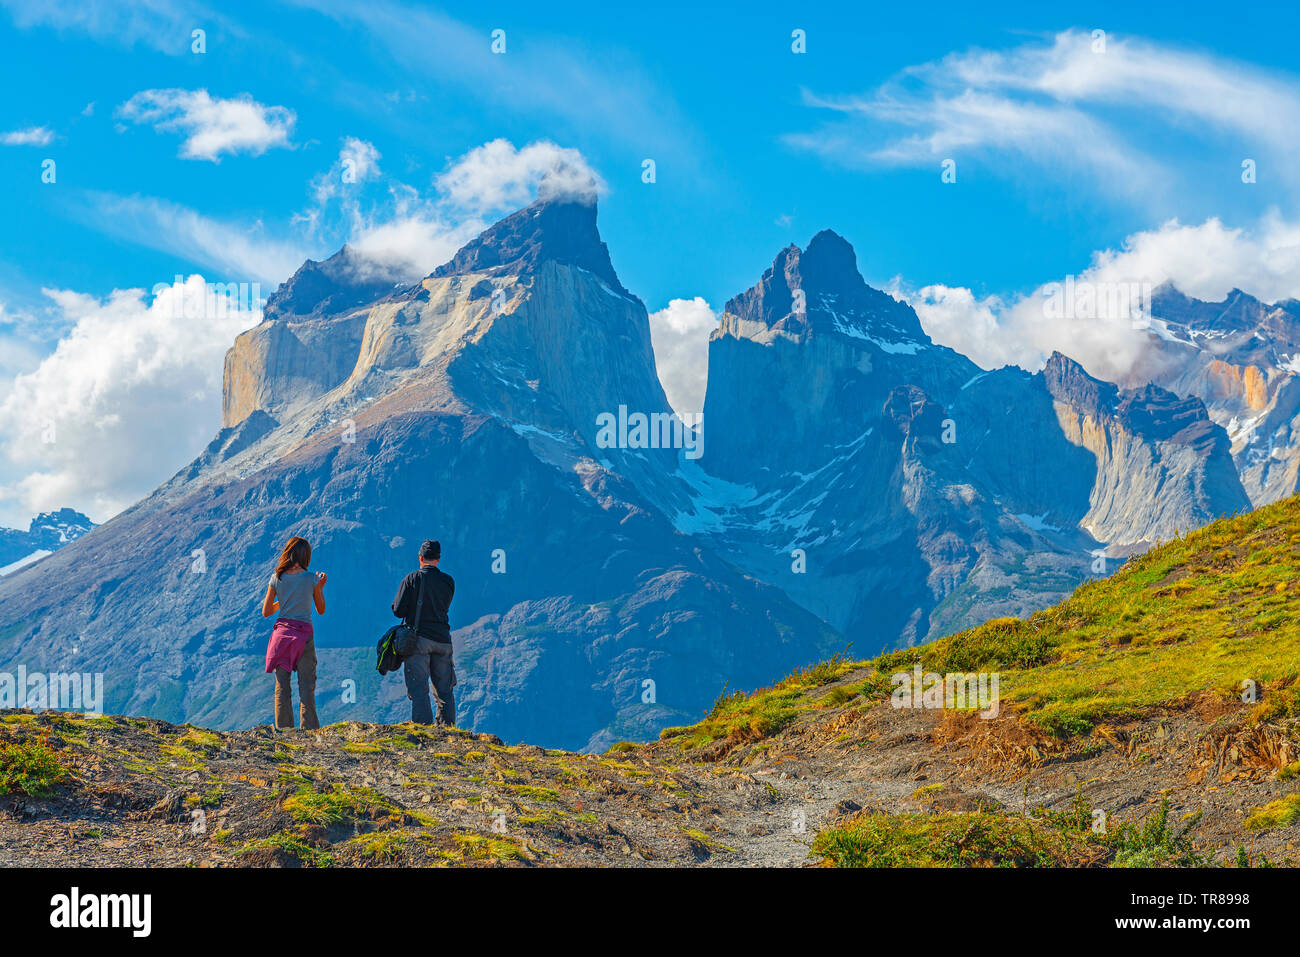 Two tourists, a woman and a man, by the Andes peaks of Cuernos del Paine at sunset, Torres del Paine national park, Puerto Natales, Patagonia, Chile. Stock Photo